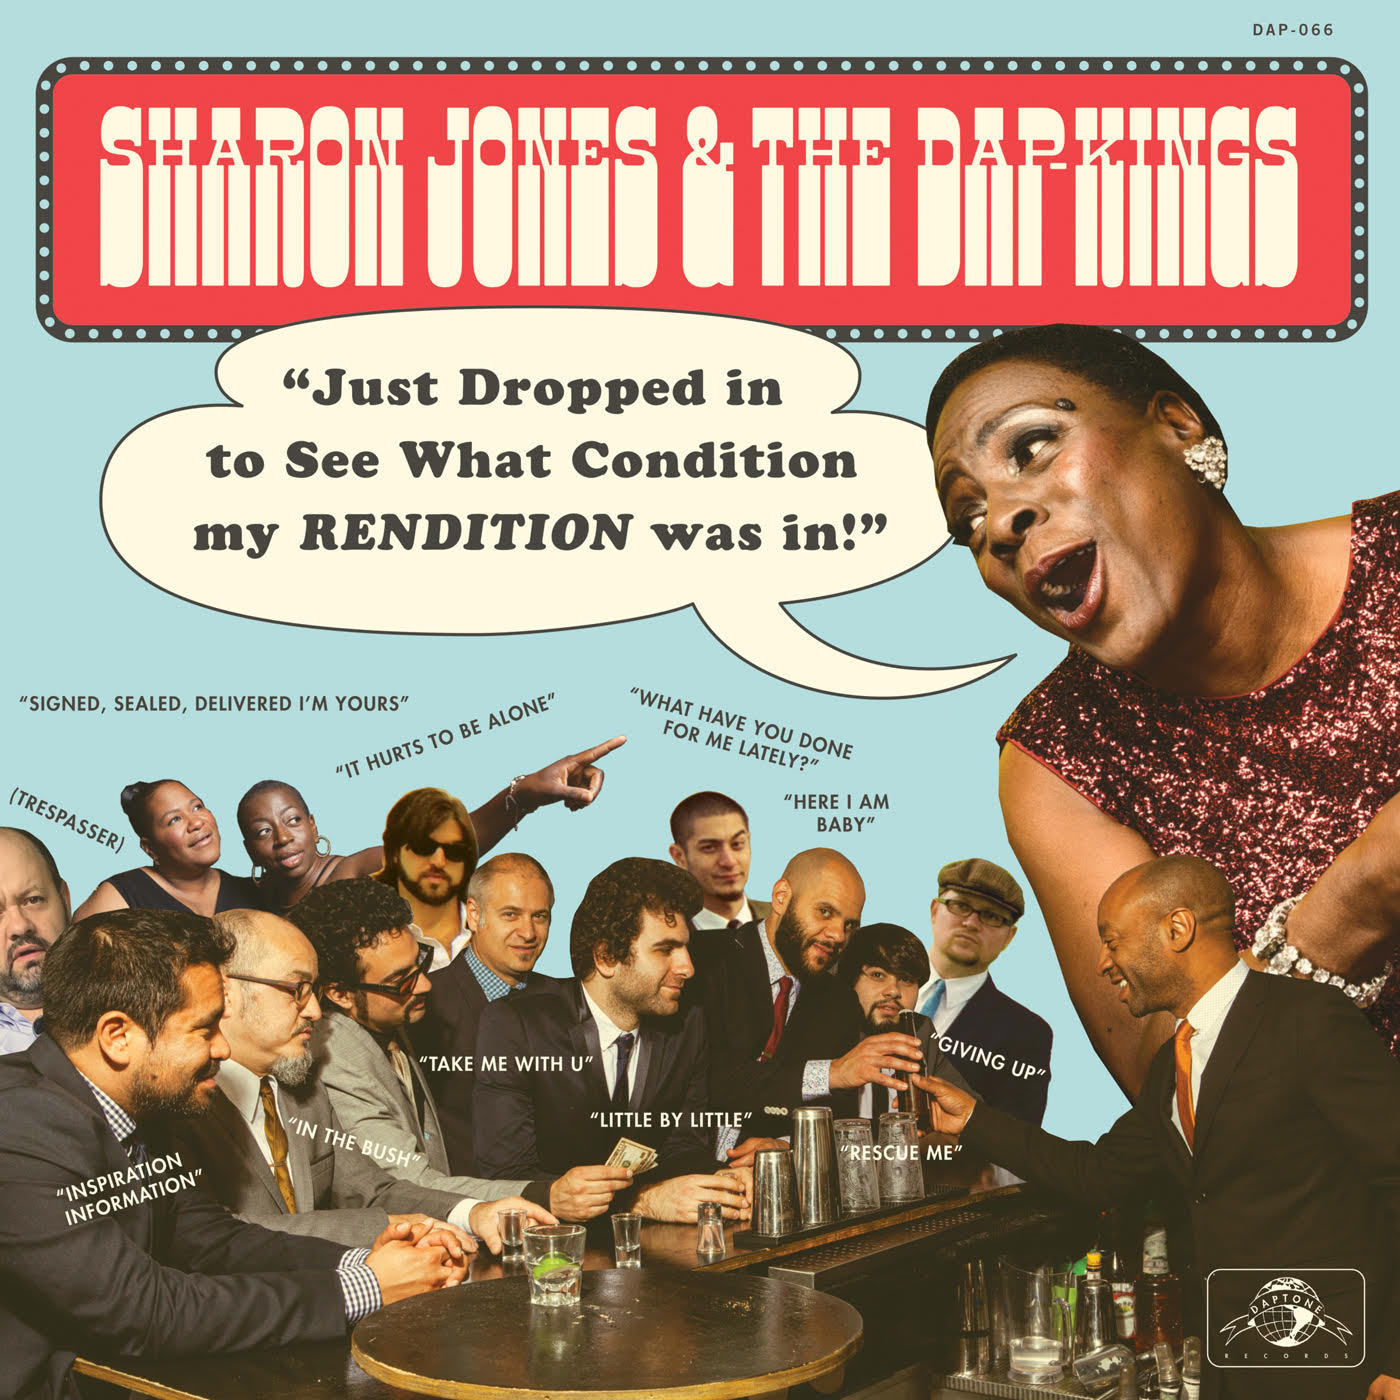 Sharon Jones & The Dap-kings – Just Dropped In (To See What Condition My Rendition Was In) (2020) [FLAC 24bit/88,2kHz]